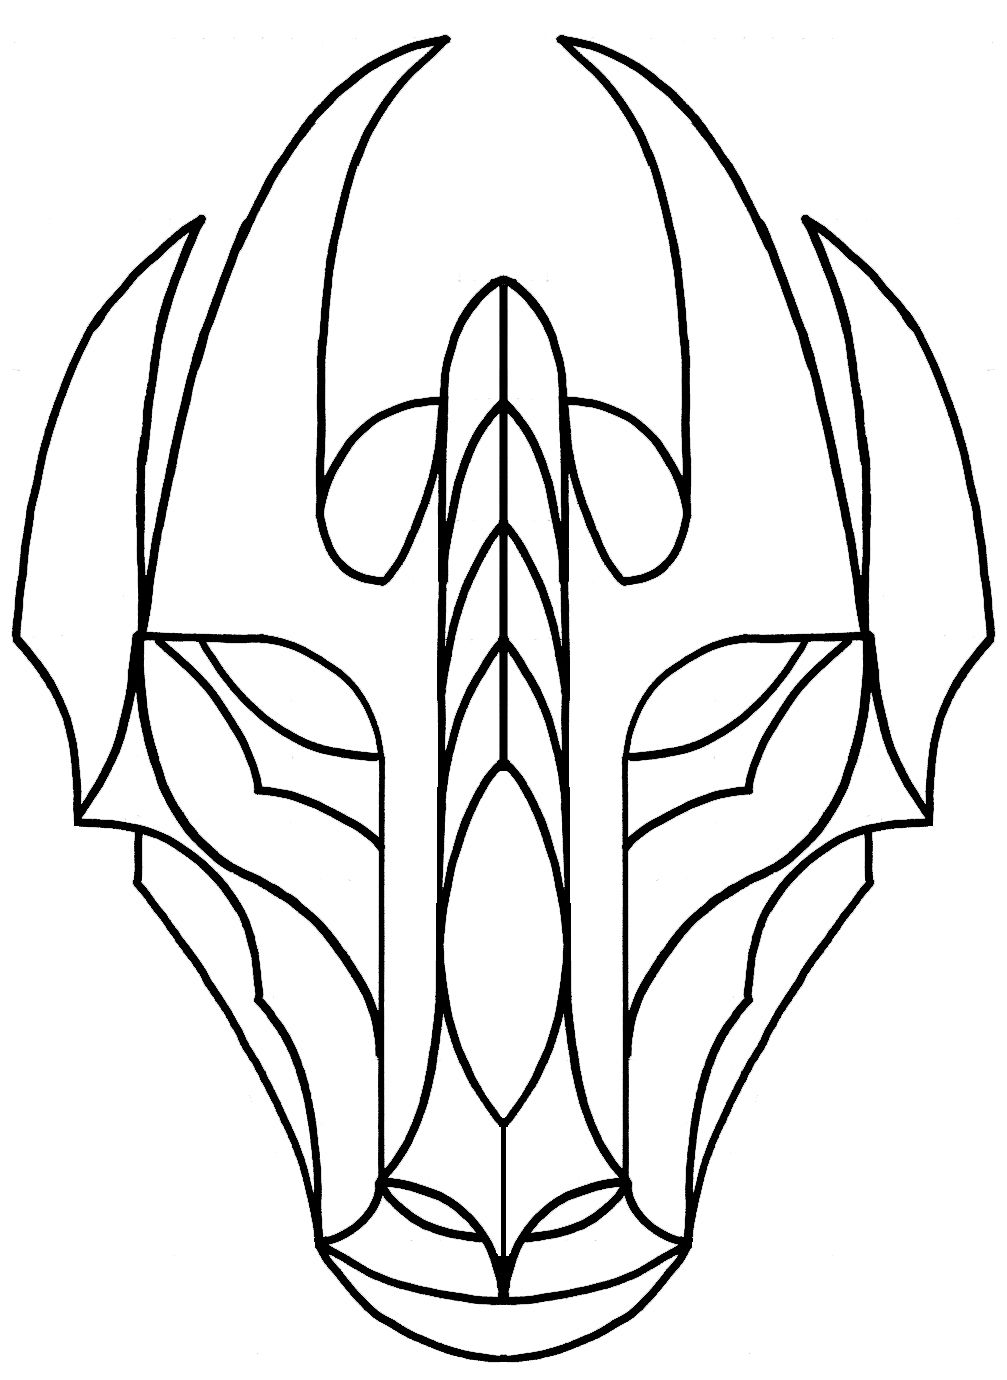 Dragon Mask Template - ClipArt Best